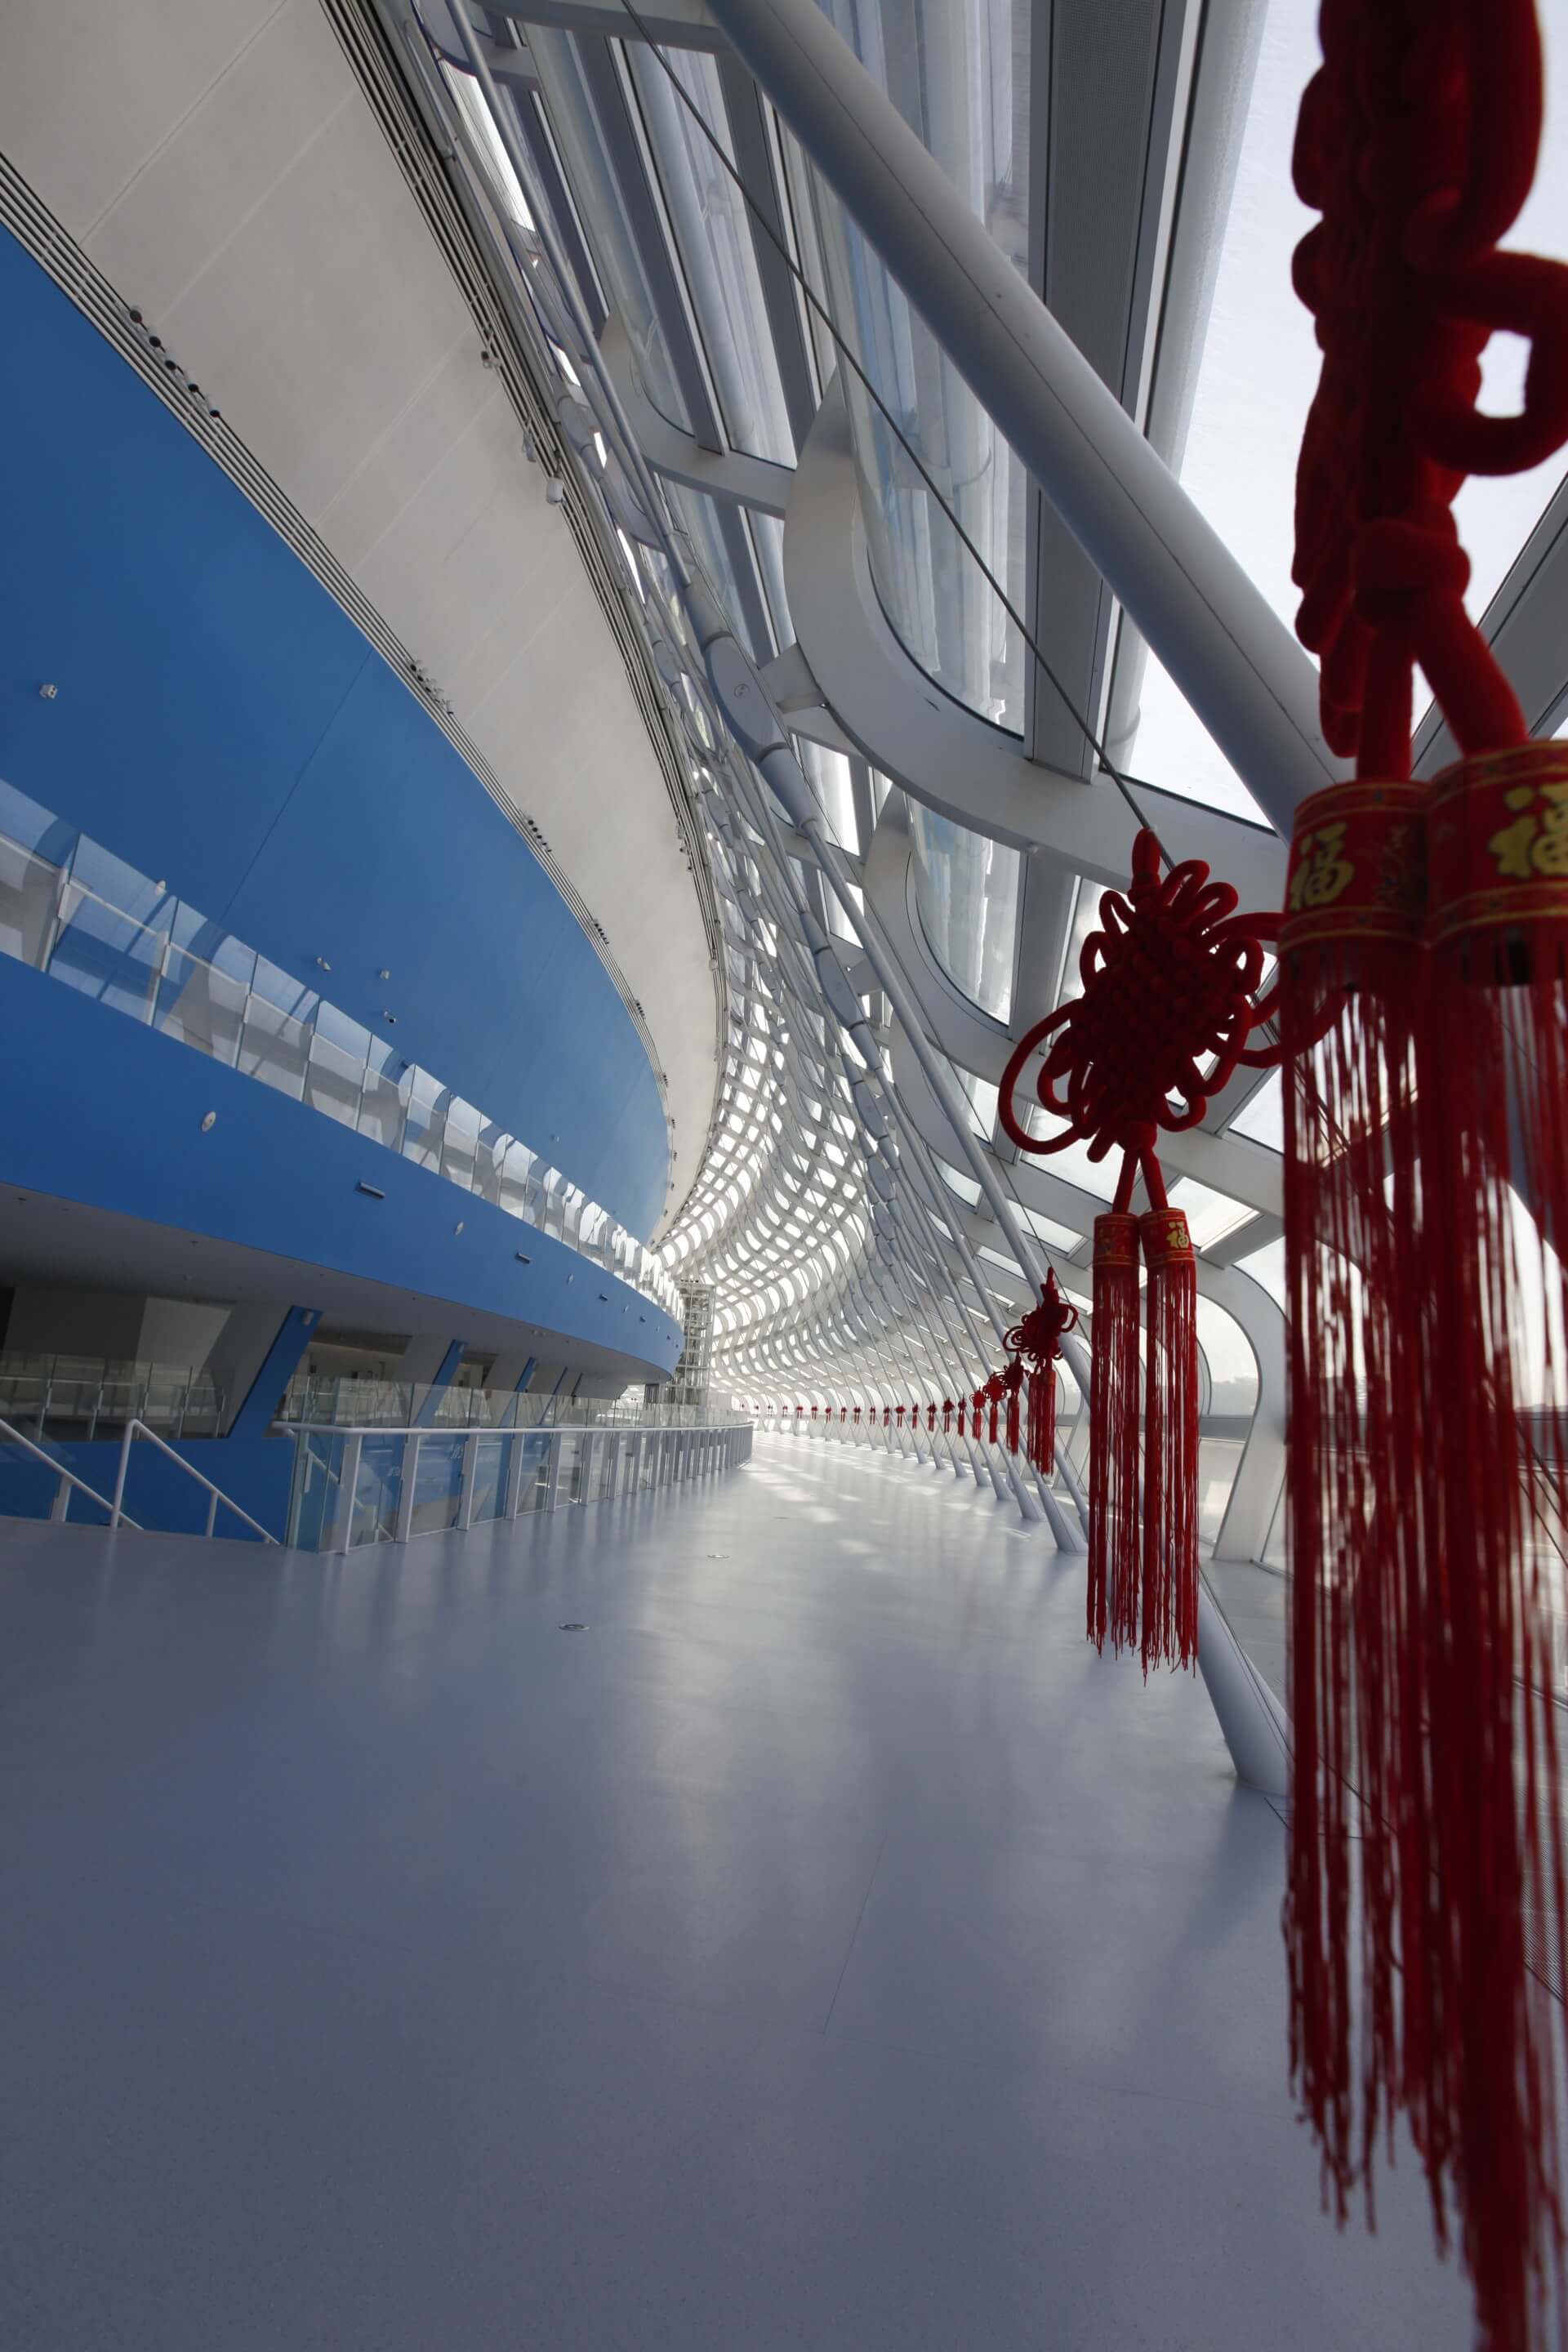 concourse of an ice sports arena with hanging chinese decor elements